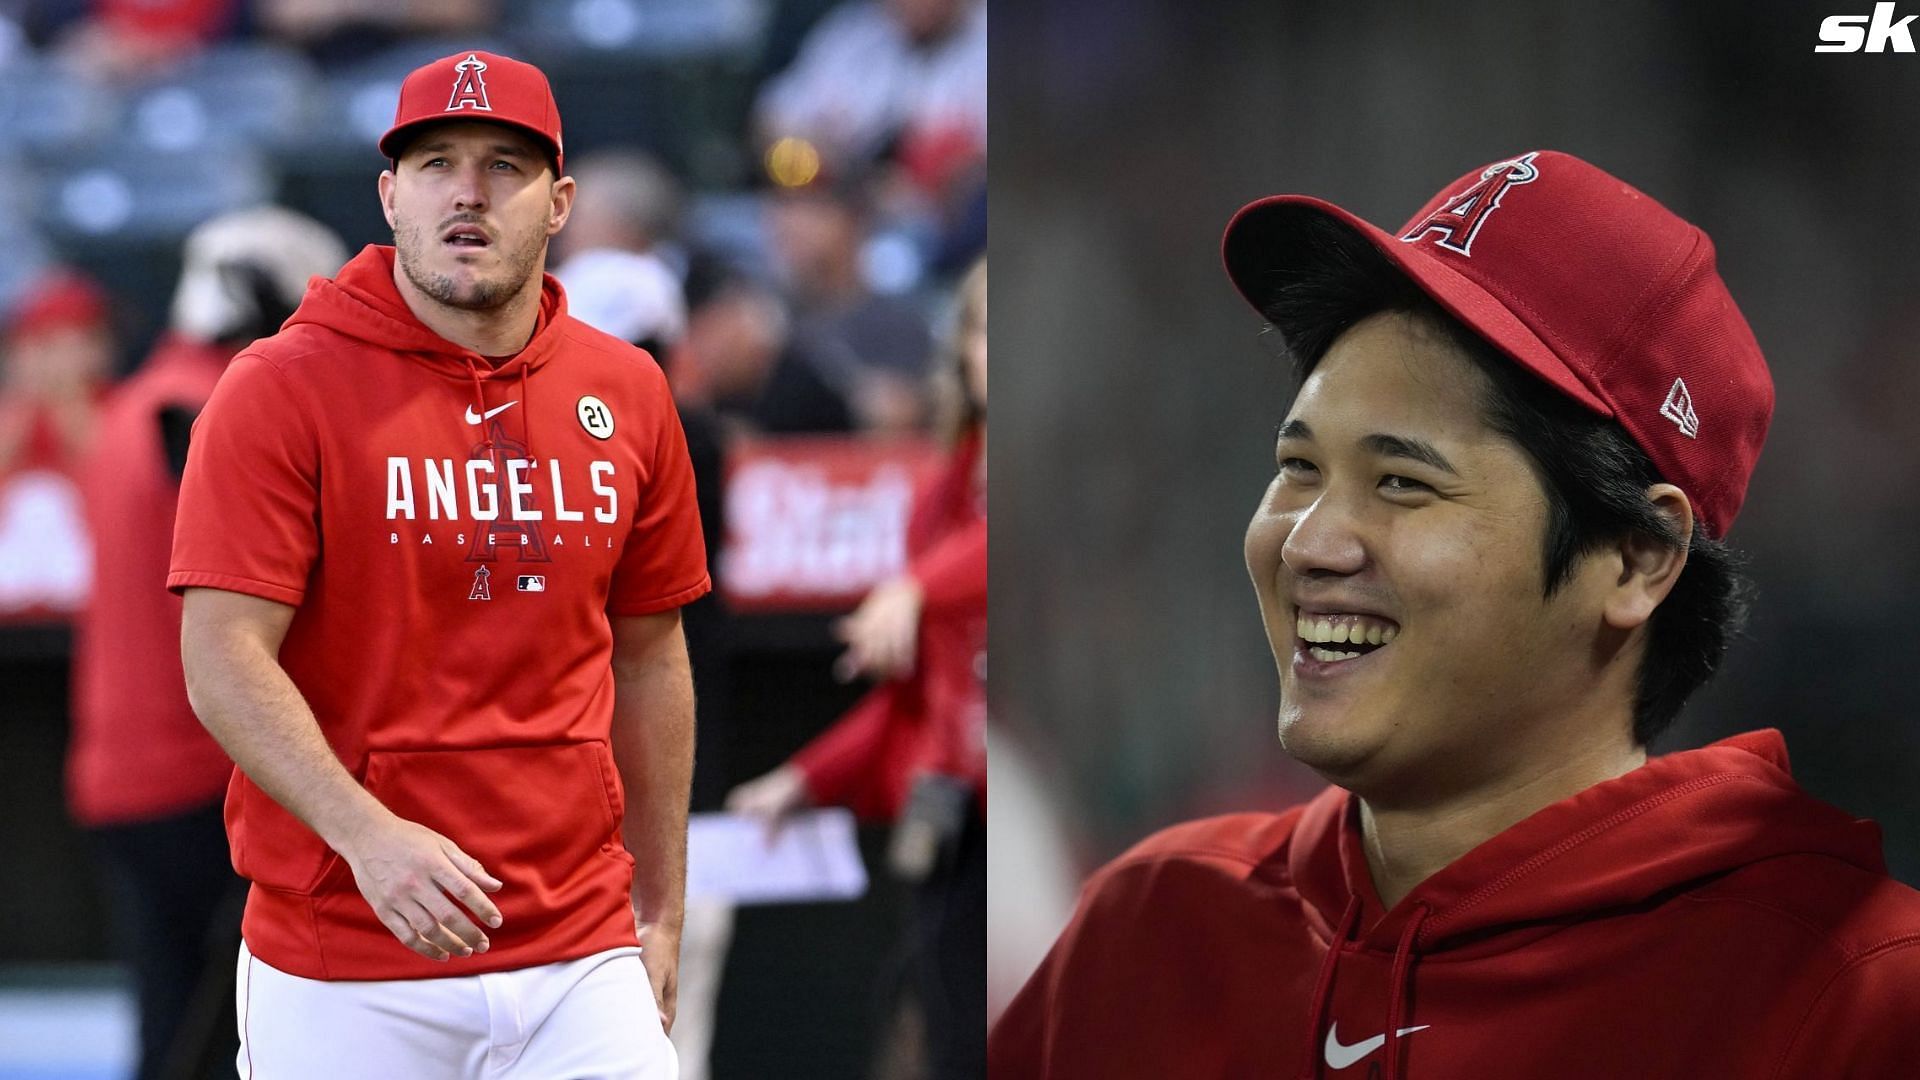 Report: Angels open to trading star OF Mike Trout